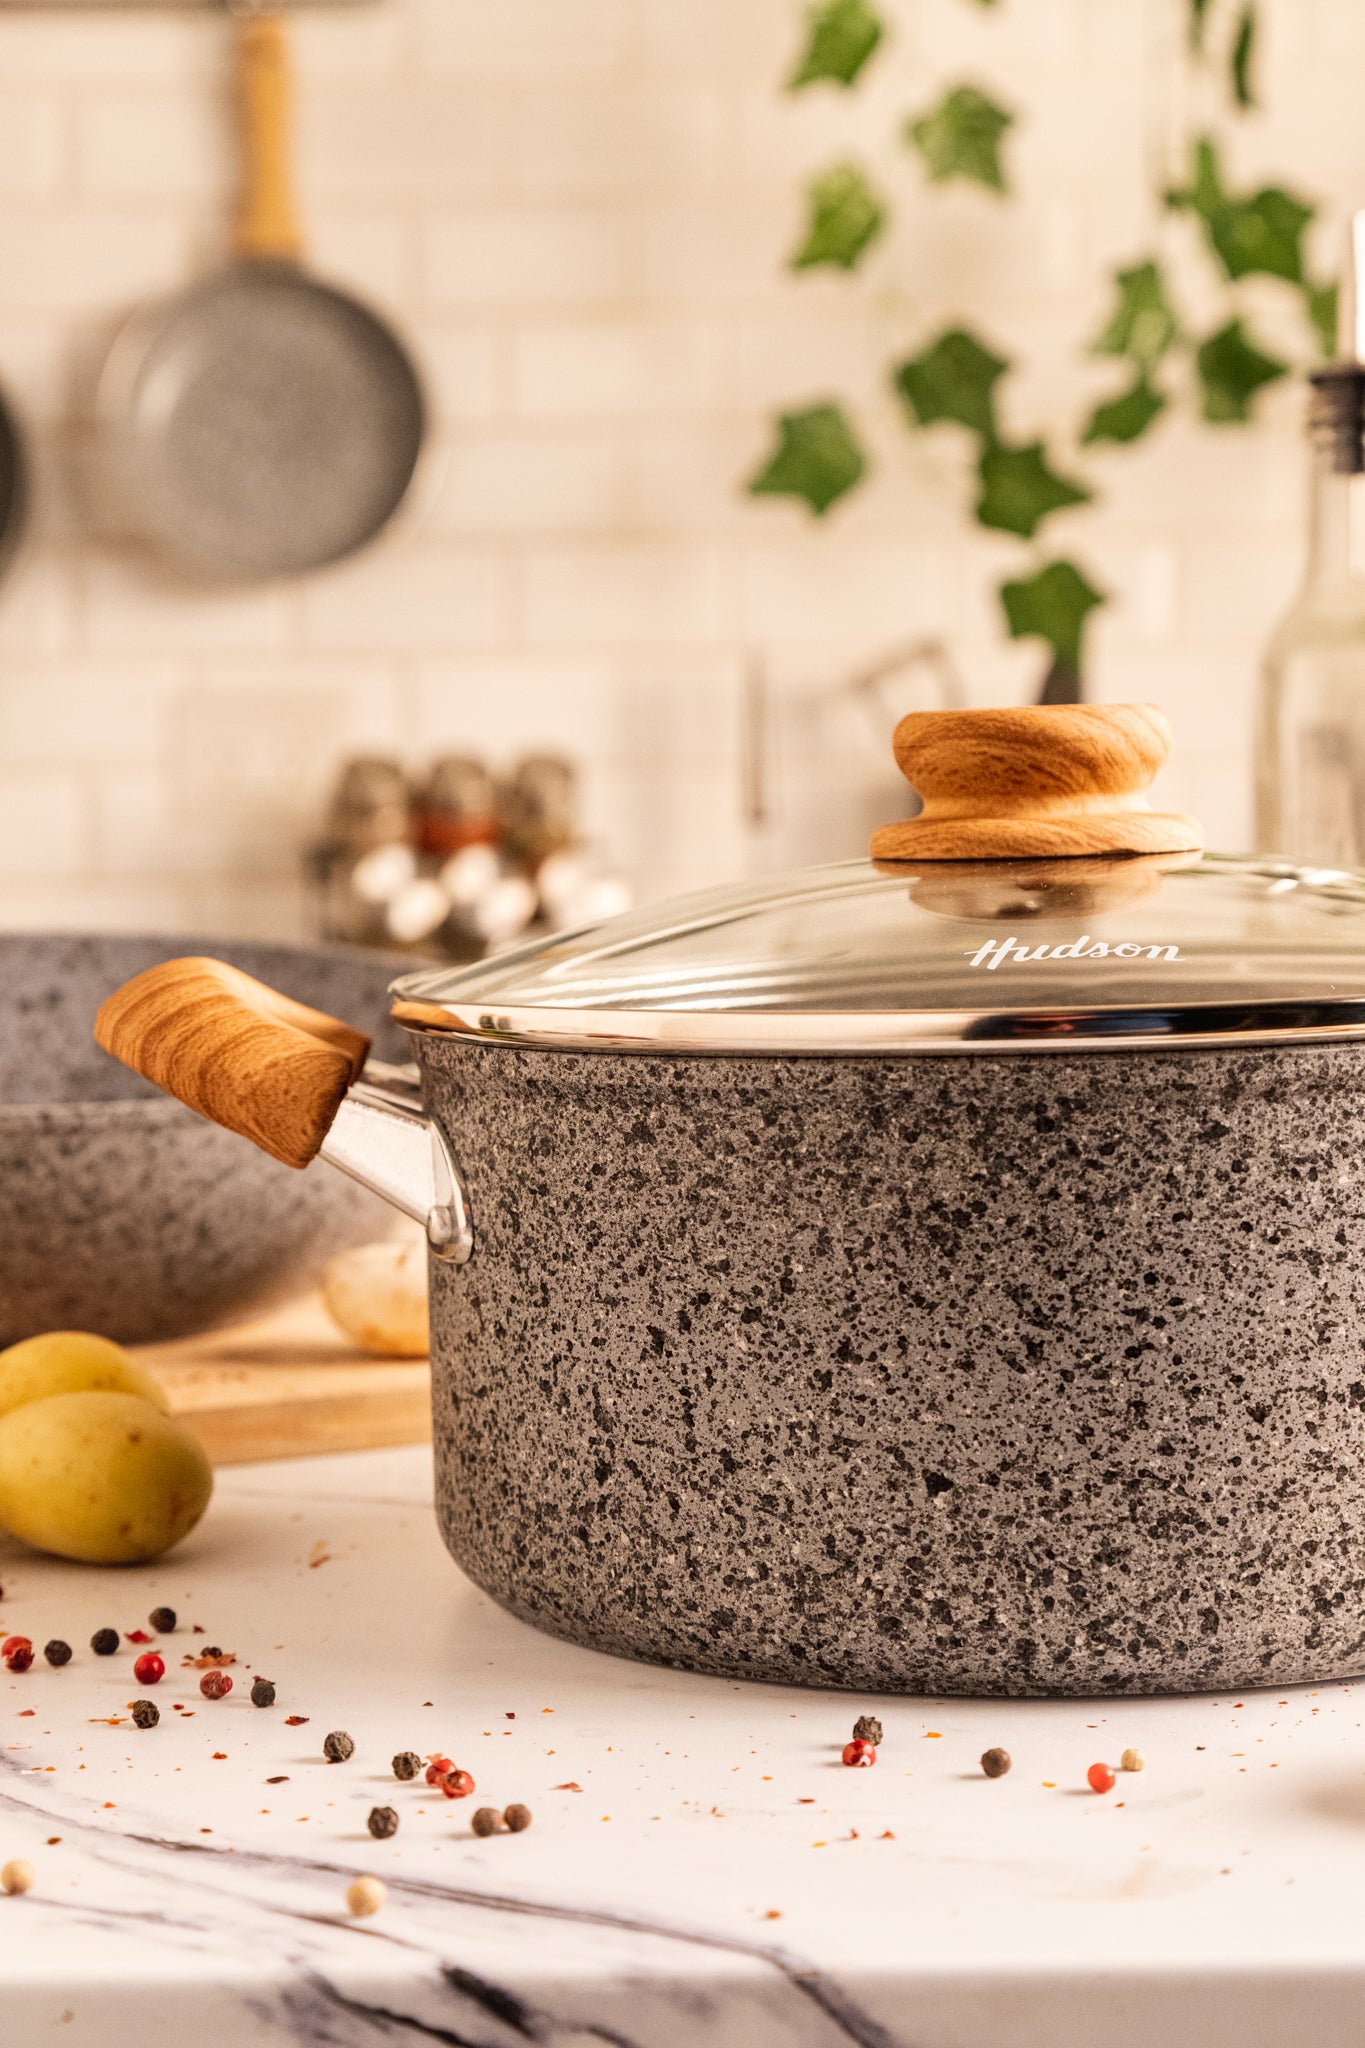 HUDSON Forged Aluminum Saucepan with tempered glass lid, 2.6-QT Granite Nonstick